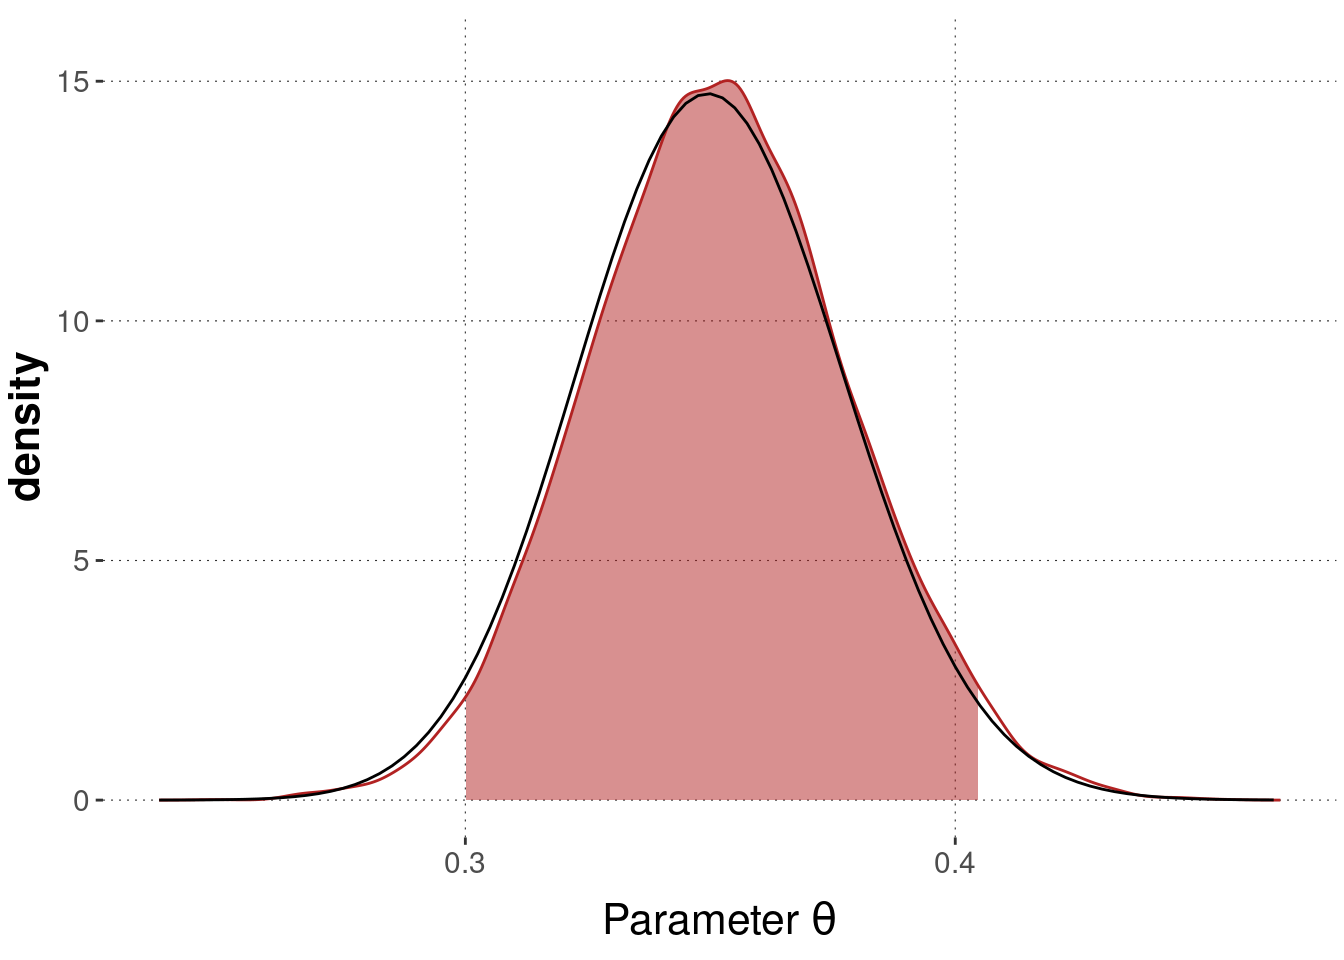 Posterior over bias $\theta$ given $k=109$ and $N=311$ approximated by samples from Stan, with estimated 95% credible interval (red area). The black curve shows the true posterior, derived through conjugacy.